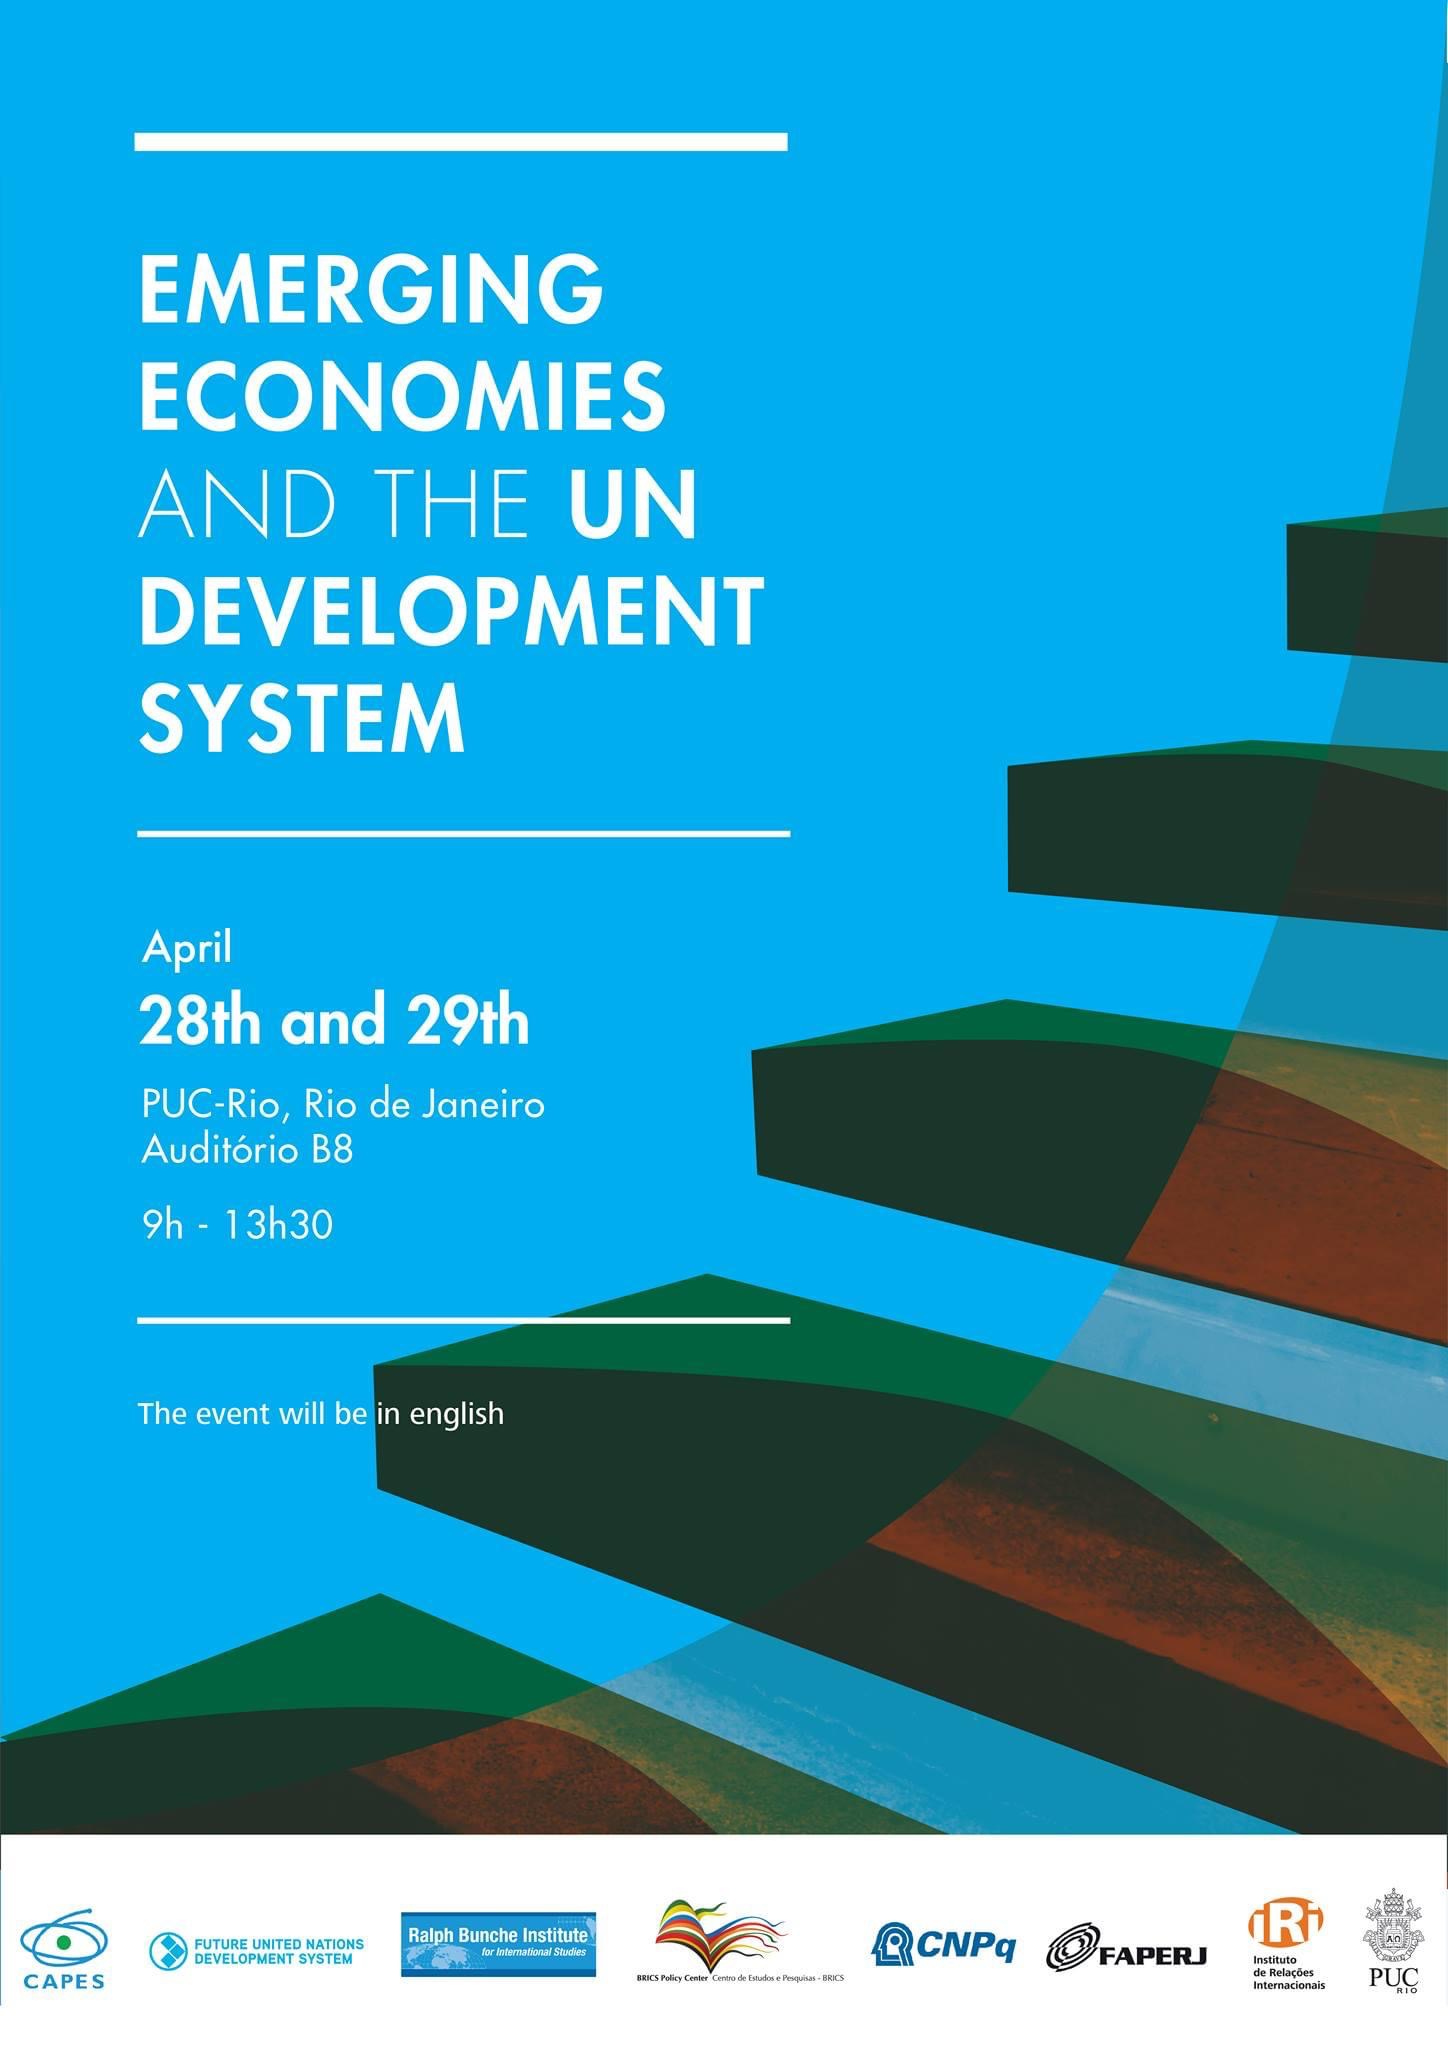 Emerging Economies And The UN Development System